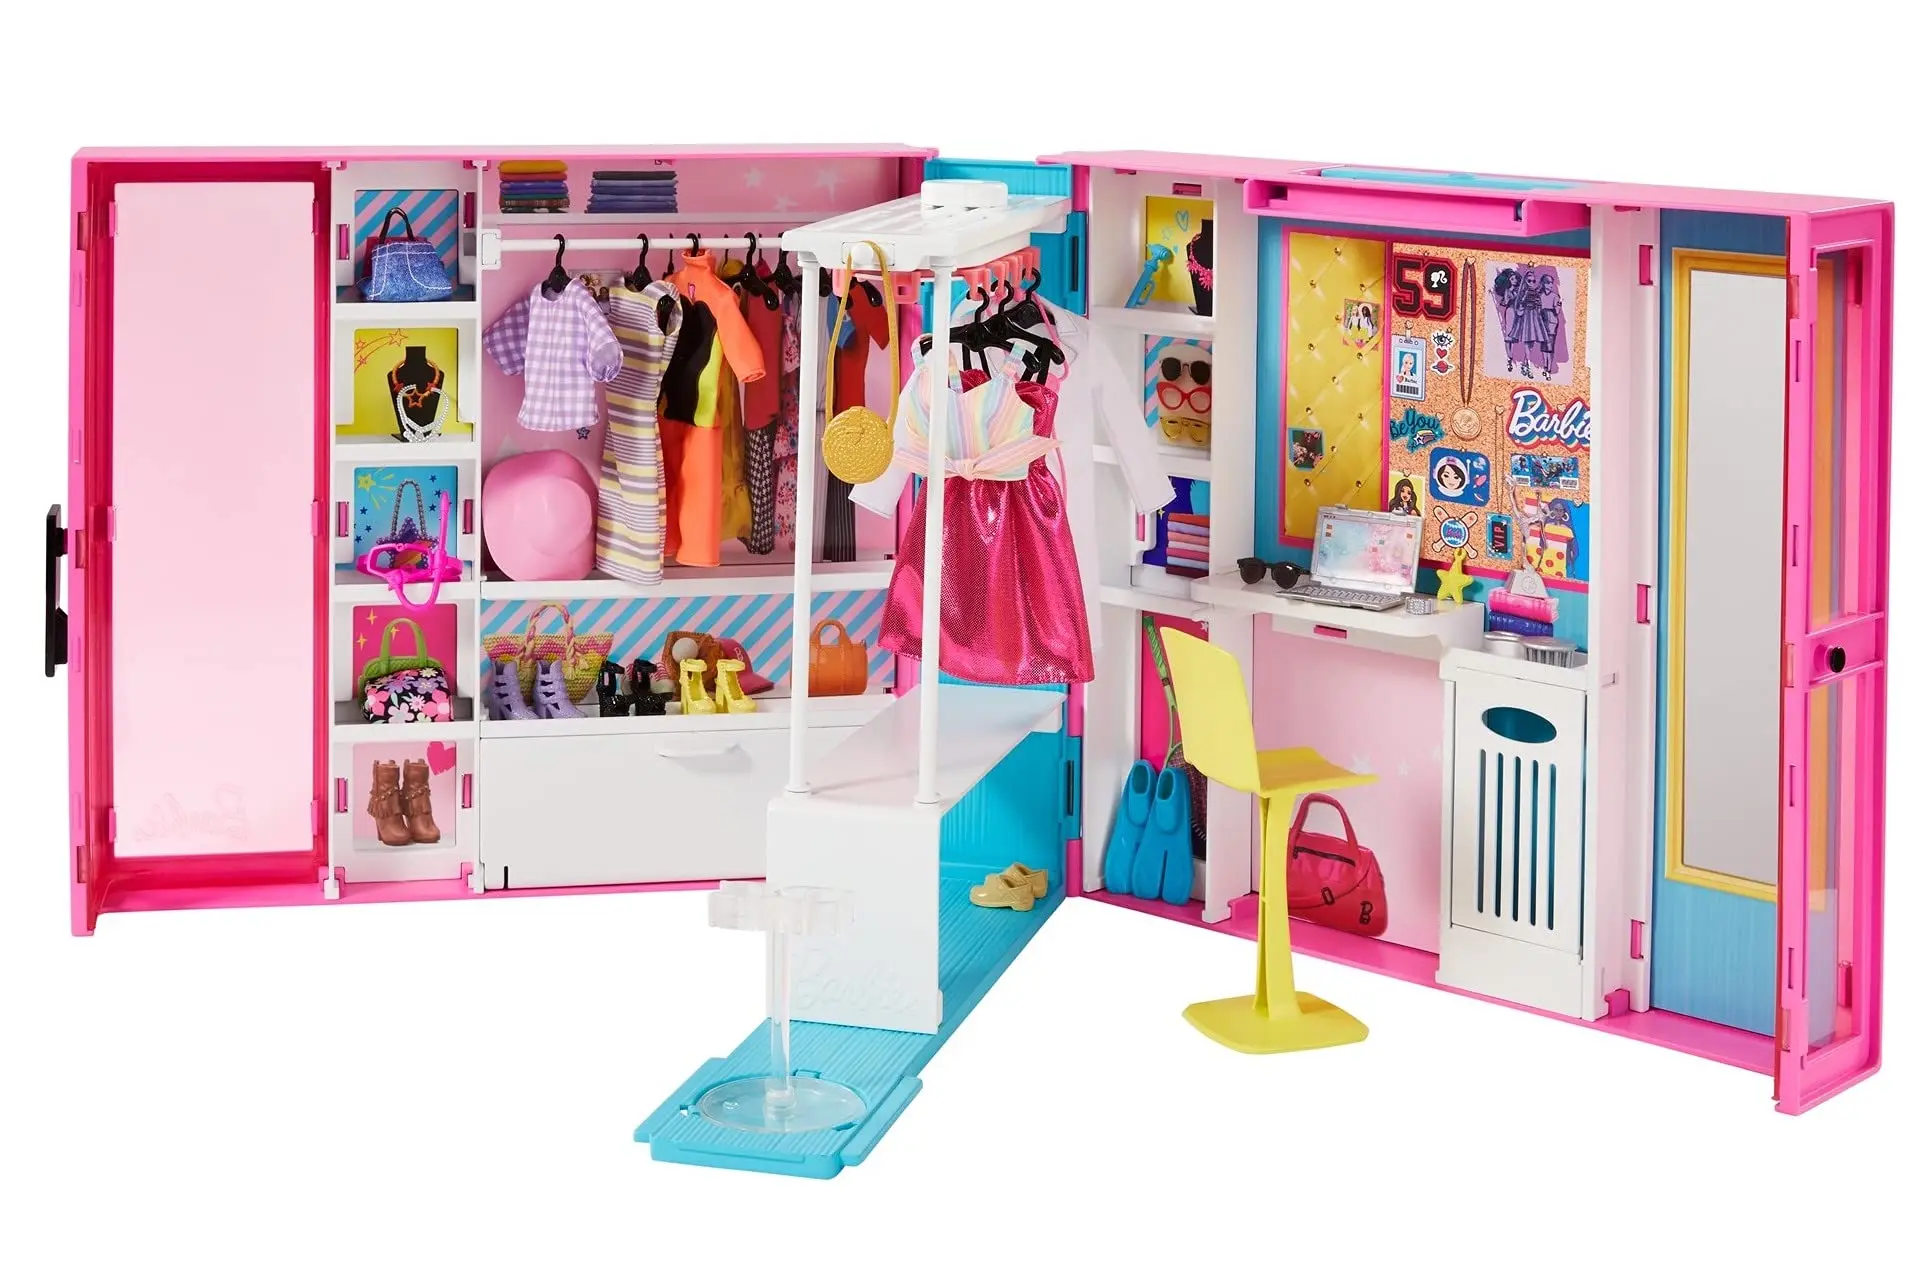 

Barbie Dream Closet Playset with 30+ Clothes and Accessories Including 5 Outfits